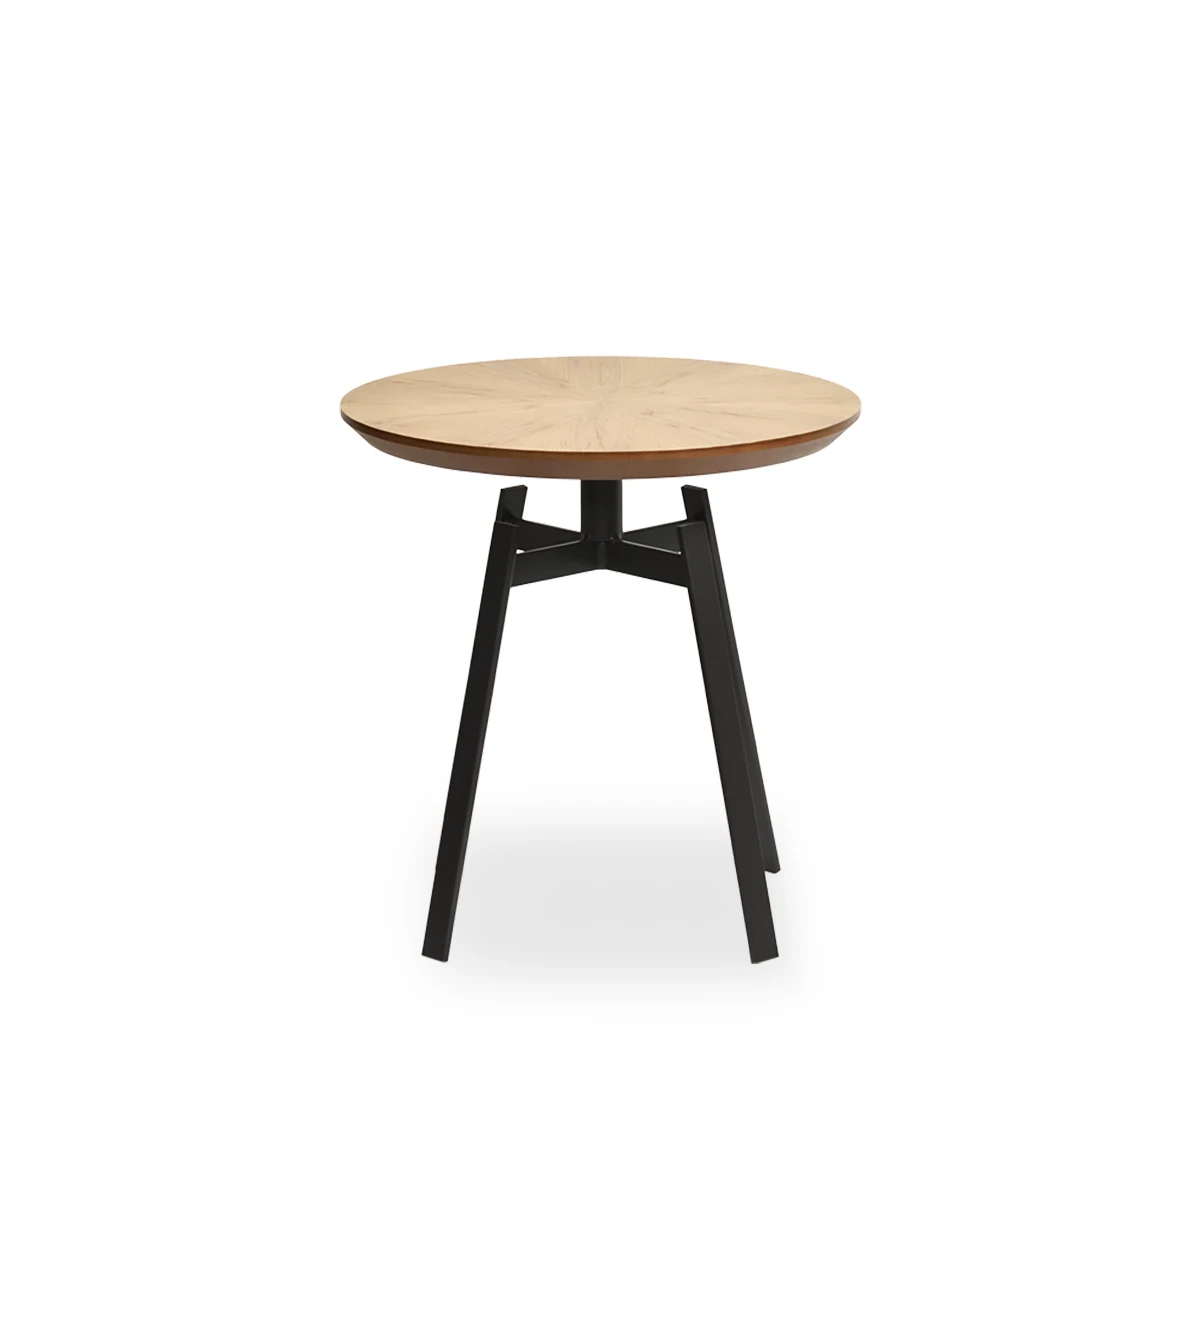 Tokyo round side table, natural oak top, black lacquered metal foot, Ø 48,5 cm.